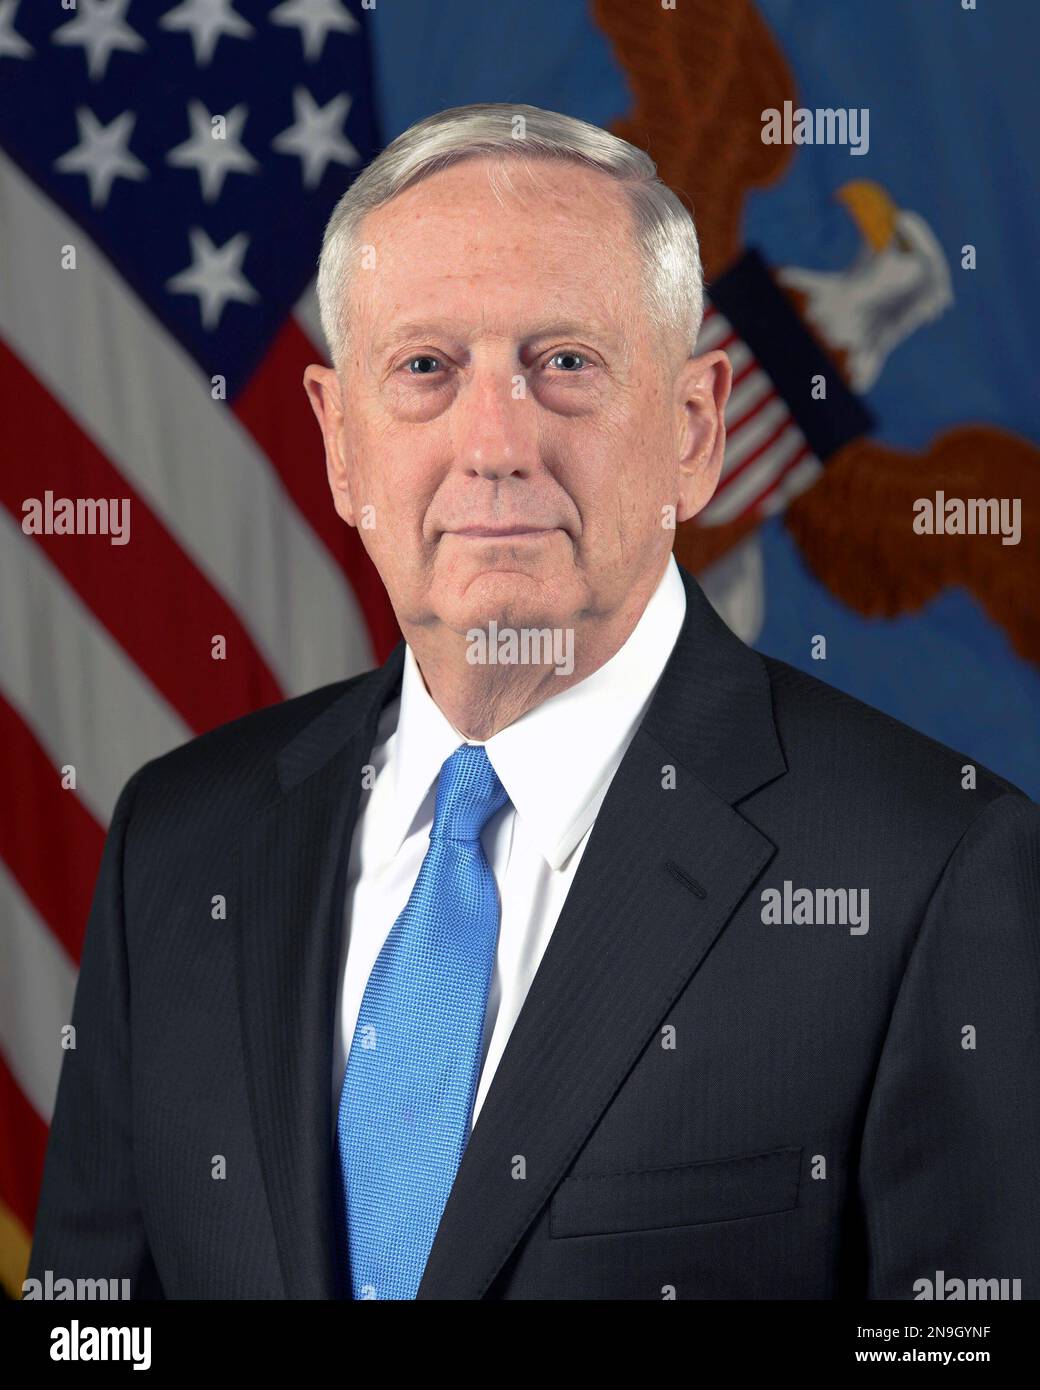 James N. Mattis, 26th Secretary of Defense, James Norman Mattis, retired United States Marine Corps four-star general who served as the 26th US secretary of defense from 2017 to 2019. Stock Photo